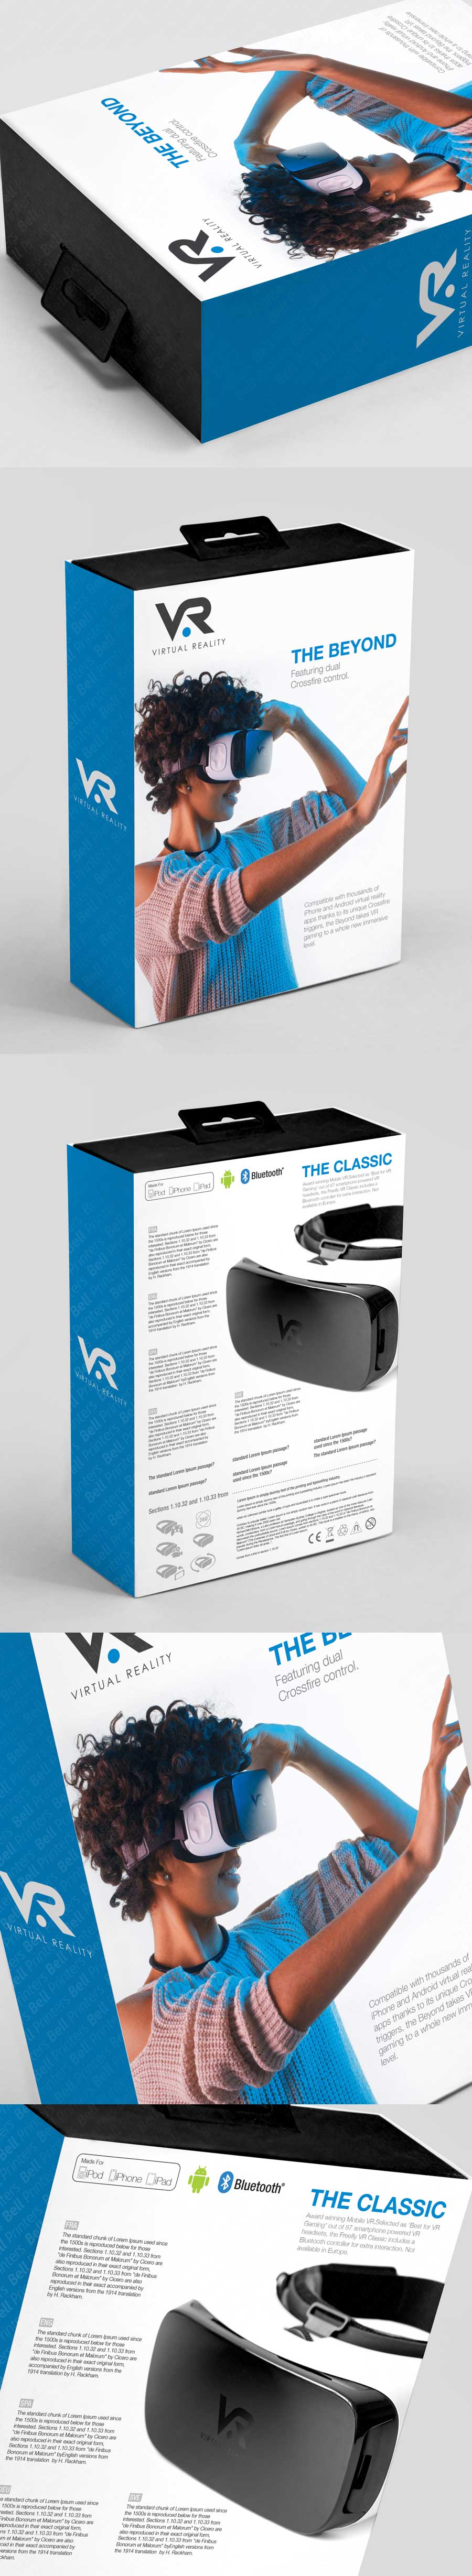 Virtual Reality Headgear Packaging Boxes | smart device Packaging boxes